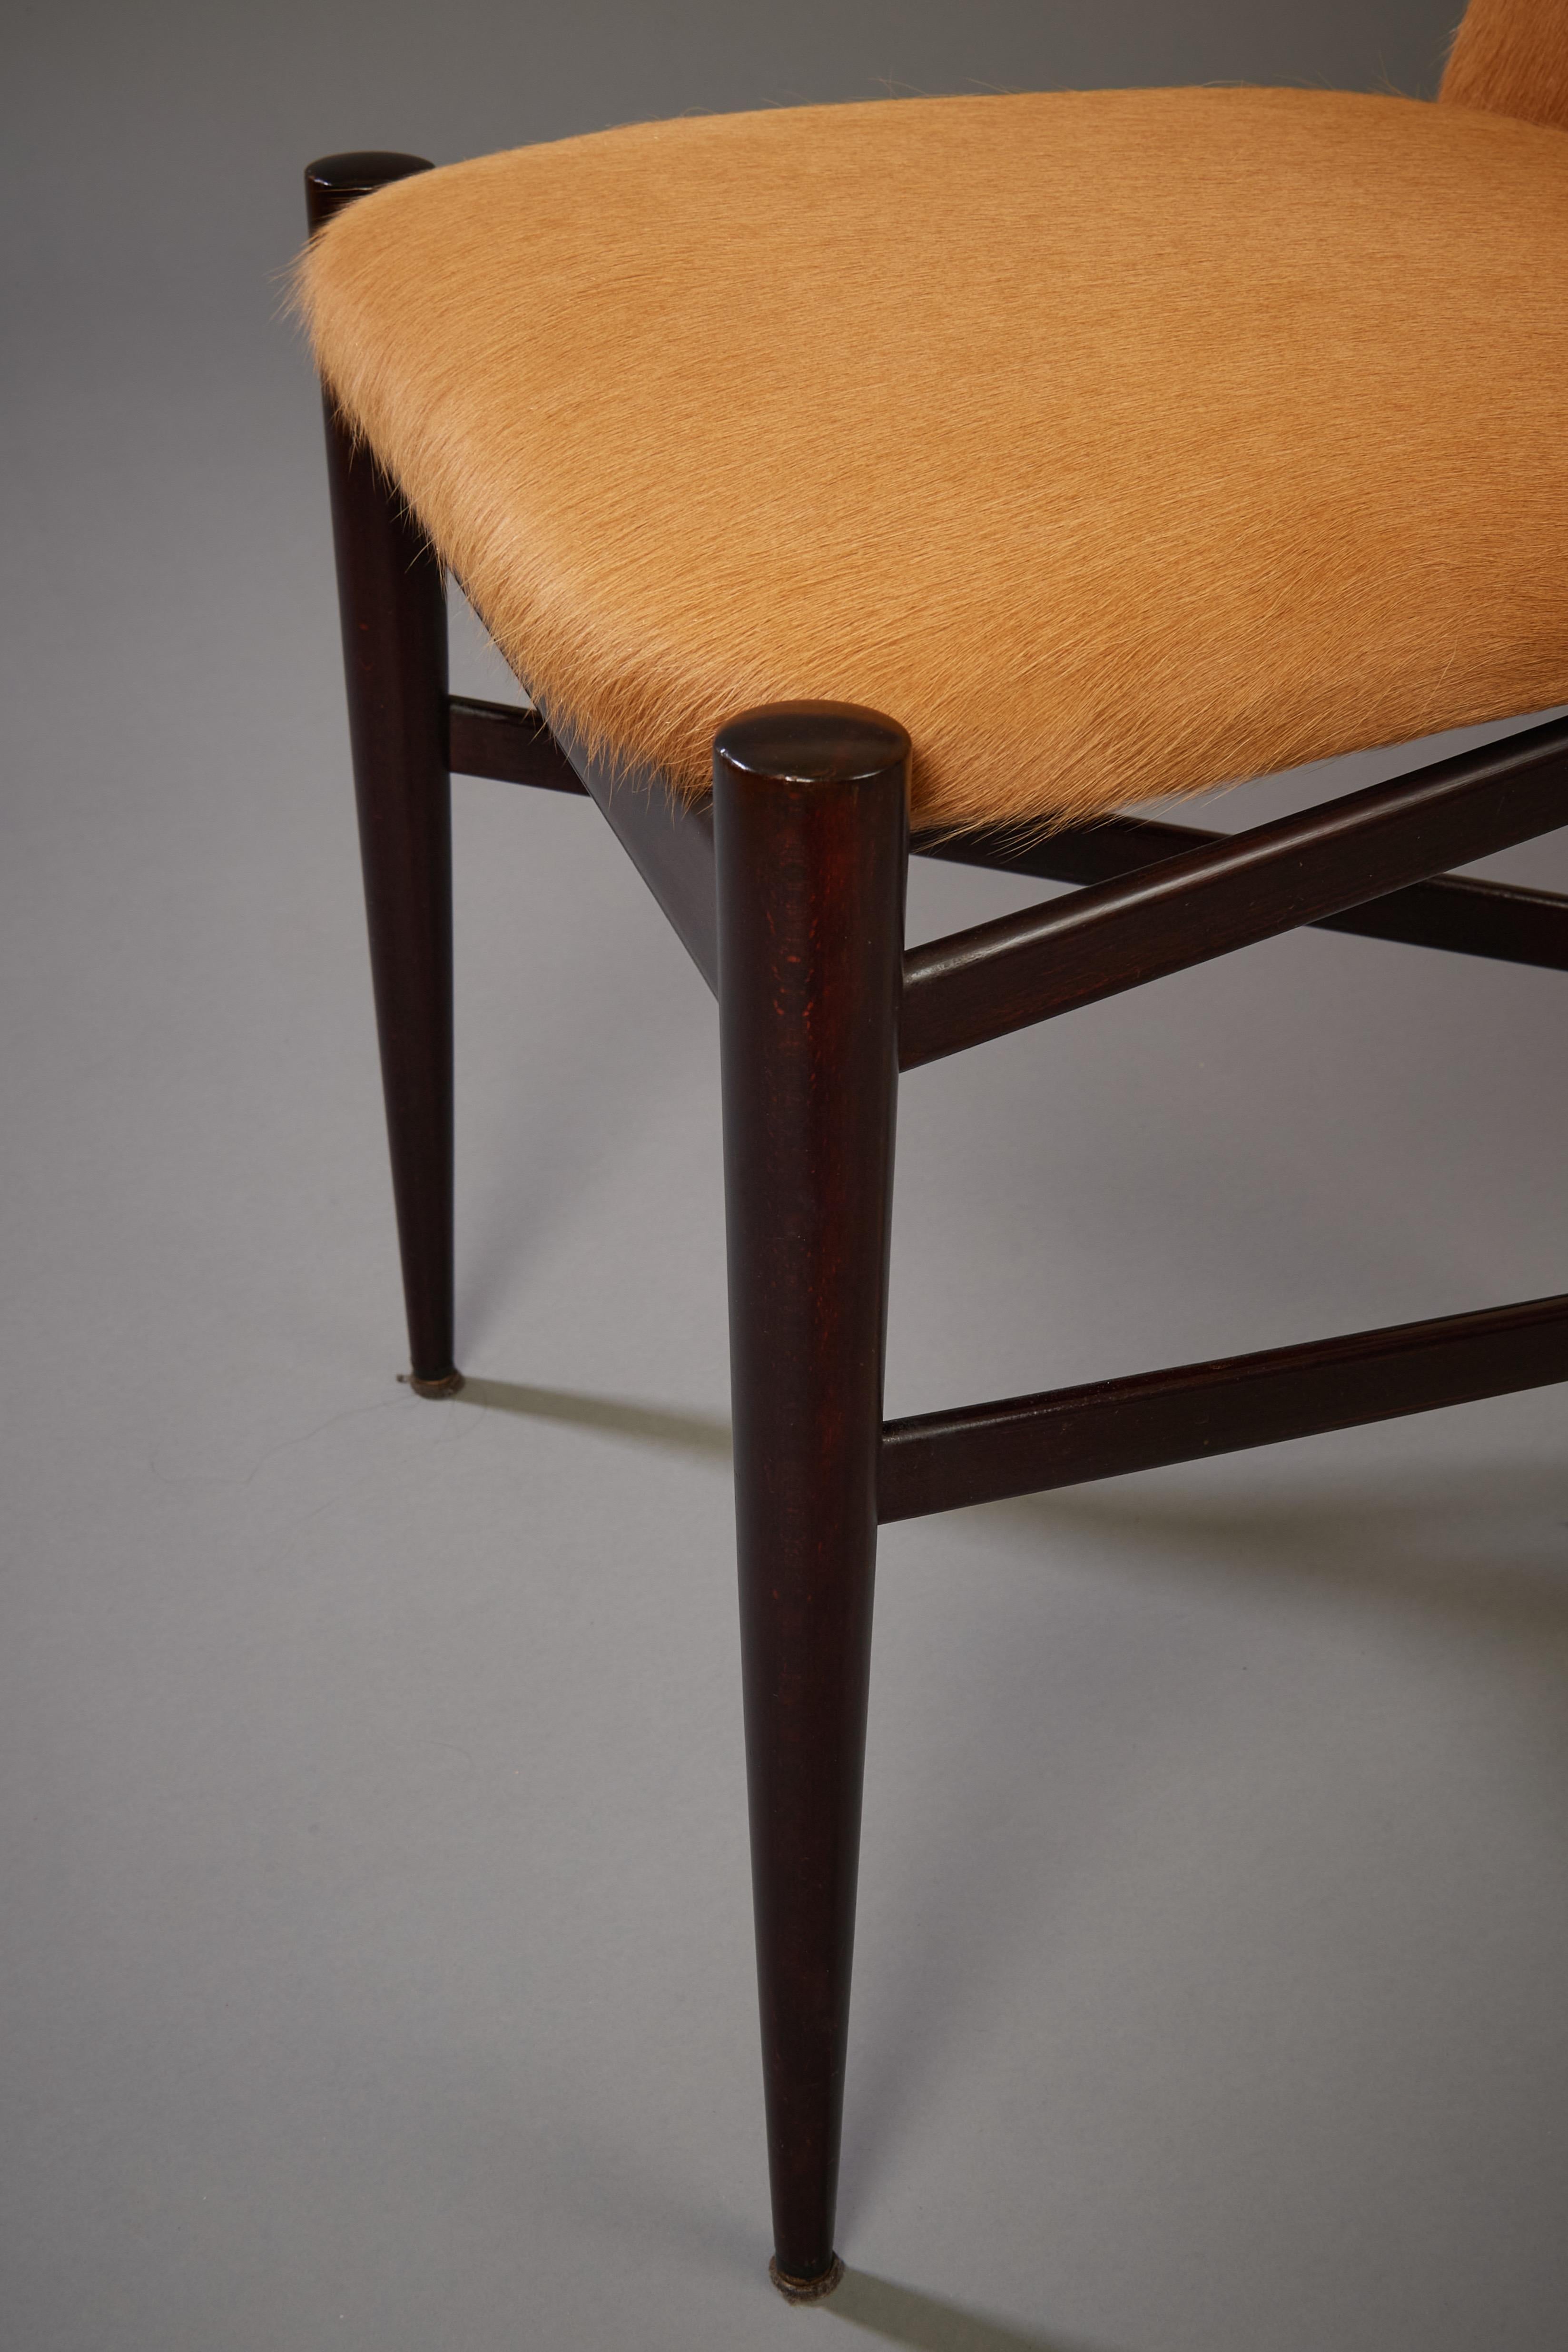 Sergio Rodrigues Six Dining Chairs in Wood and Tan Cowhide, Brazil, 1960s For Sale 12